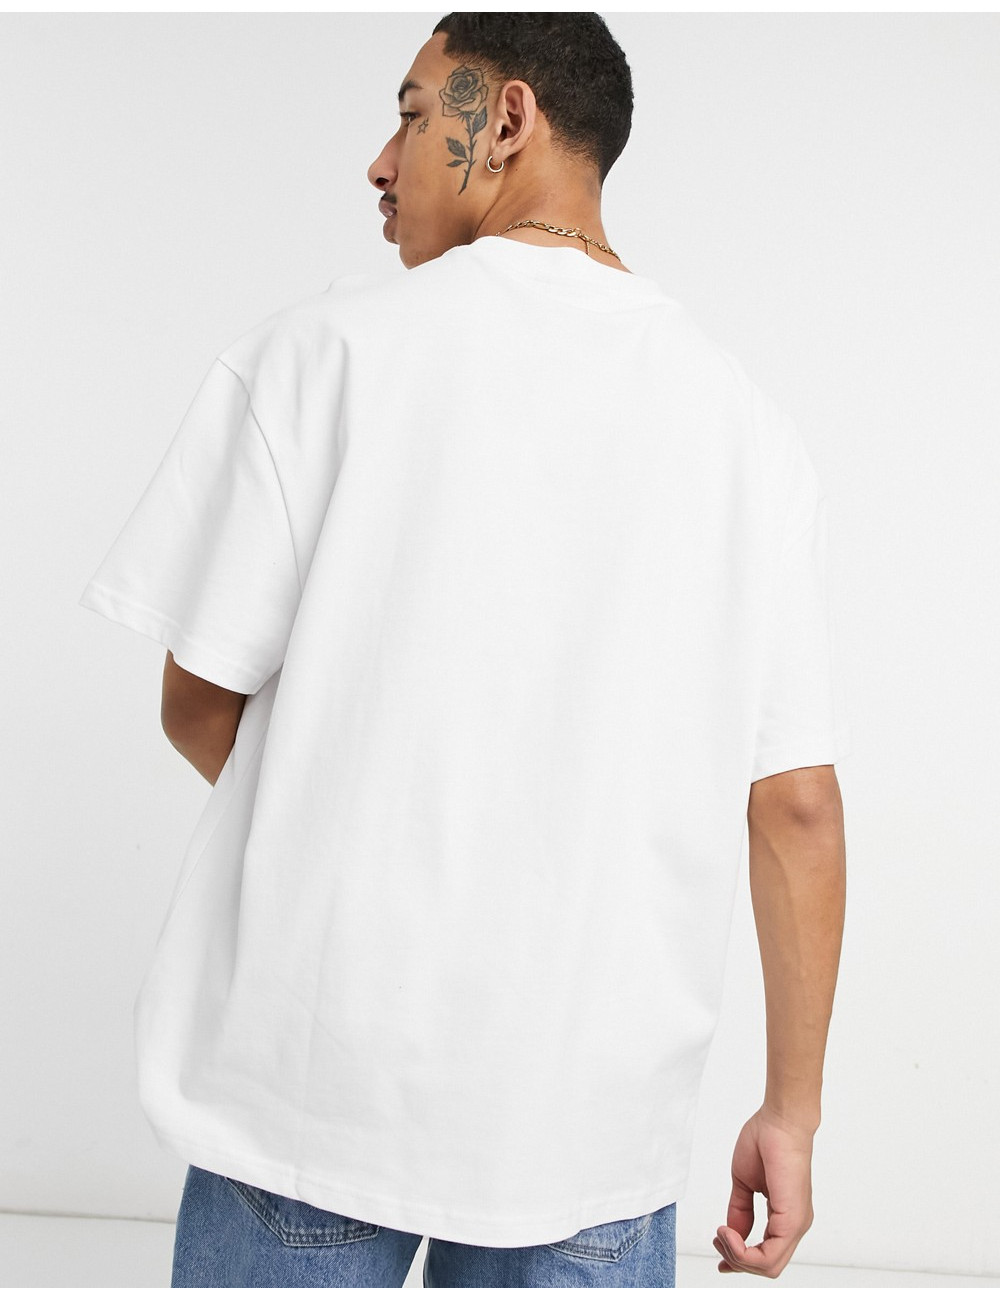 Weekday great t-shirt in white